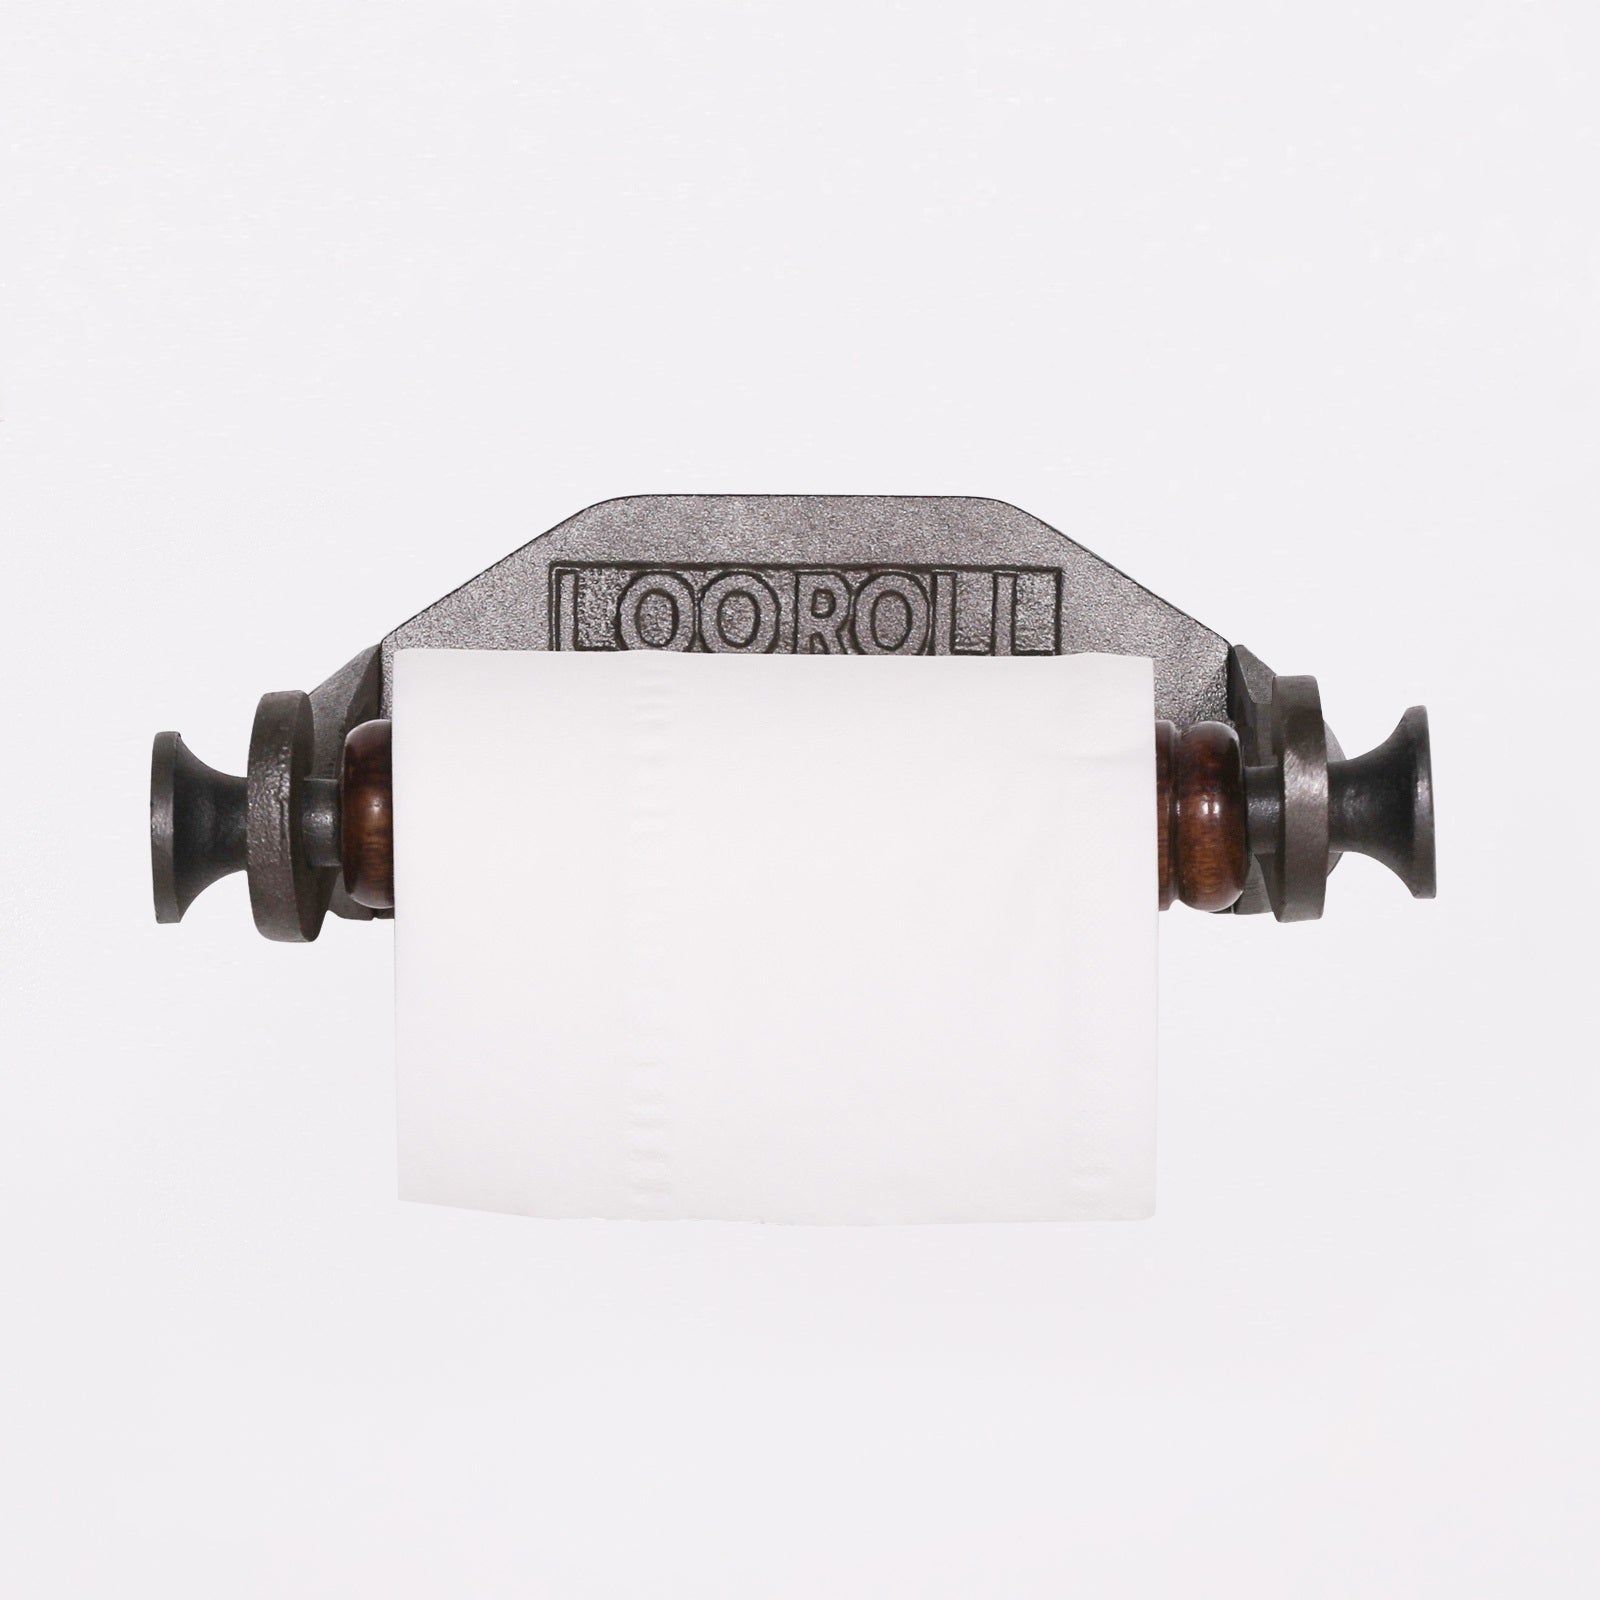 Cast Iron Toilet Loo Roll Holder with Wood CasaFenix